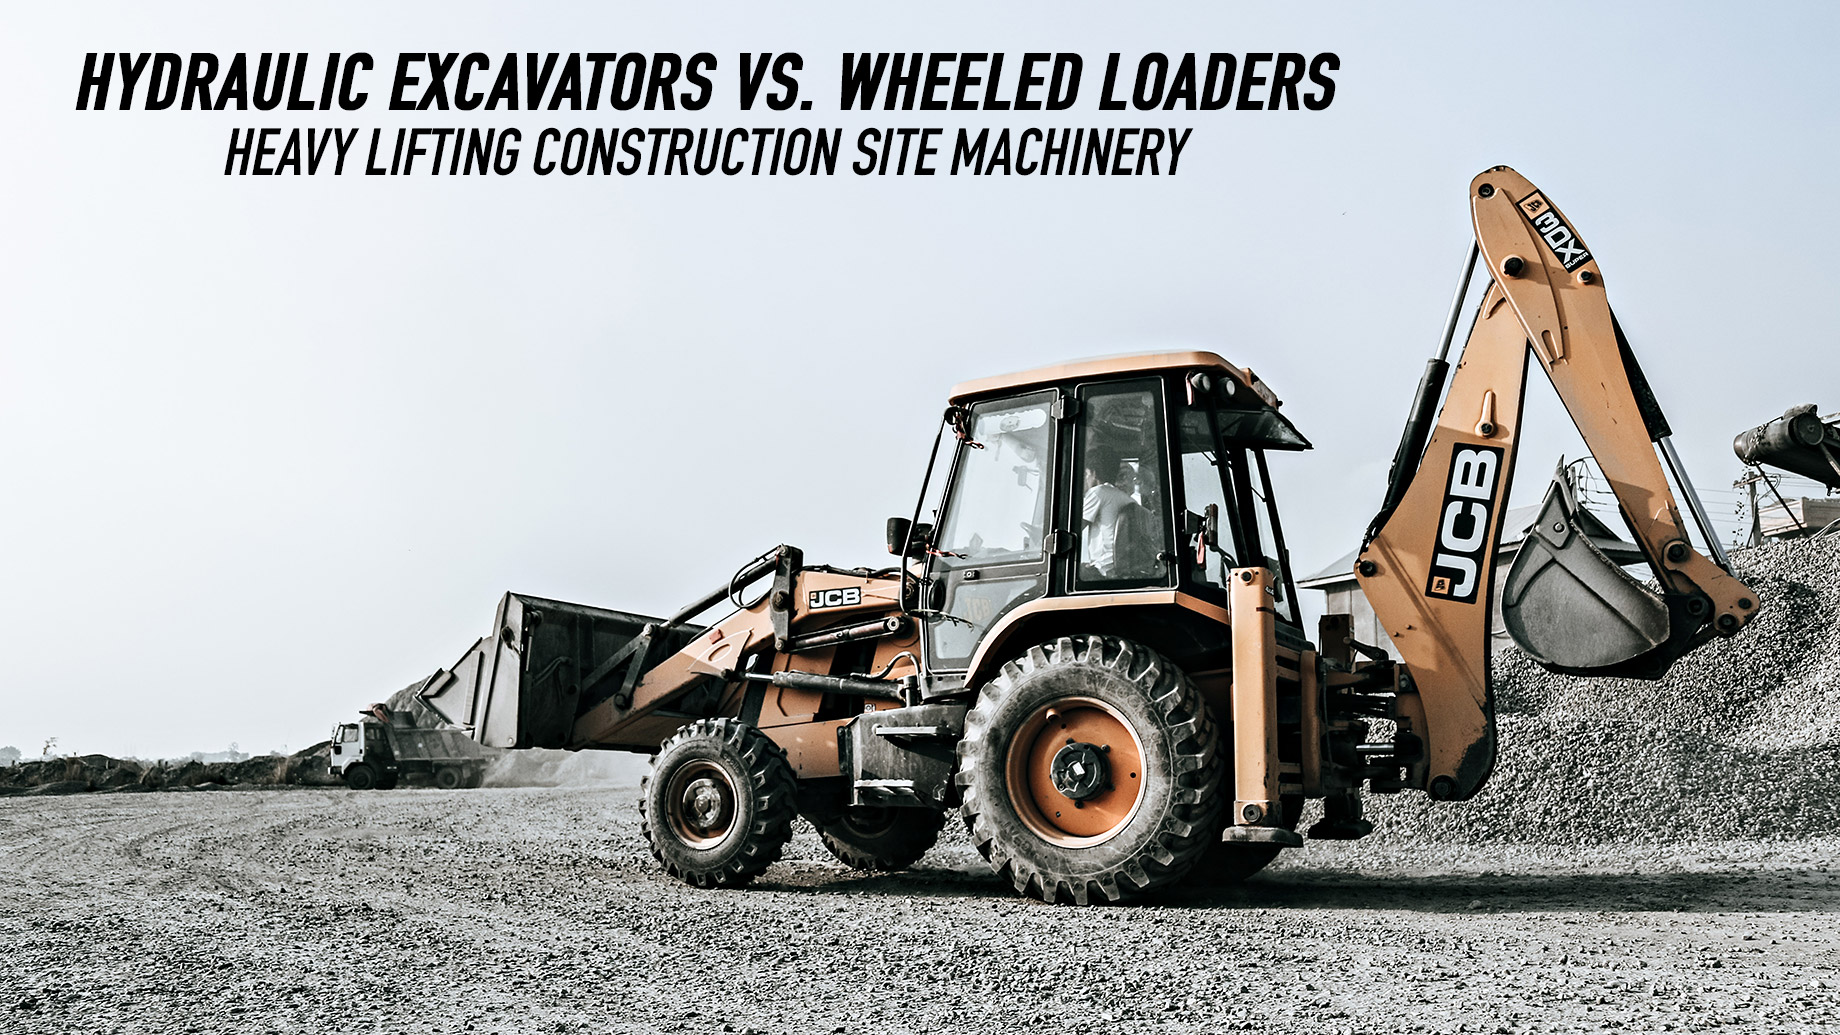 Hydraulic Excavators vs. Wheeled Loaders - Heavy Lifting Construction Site Machinery